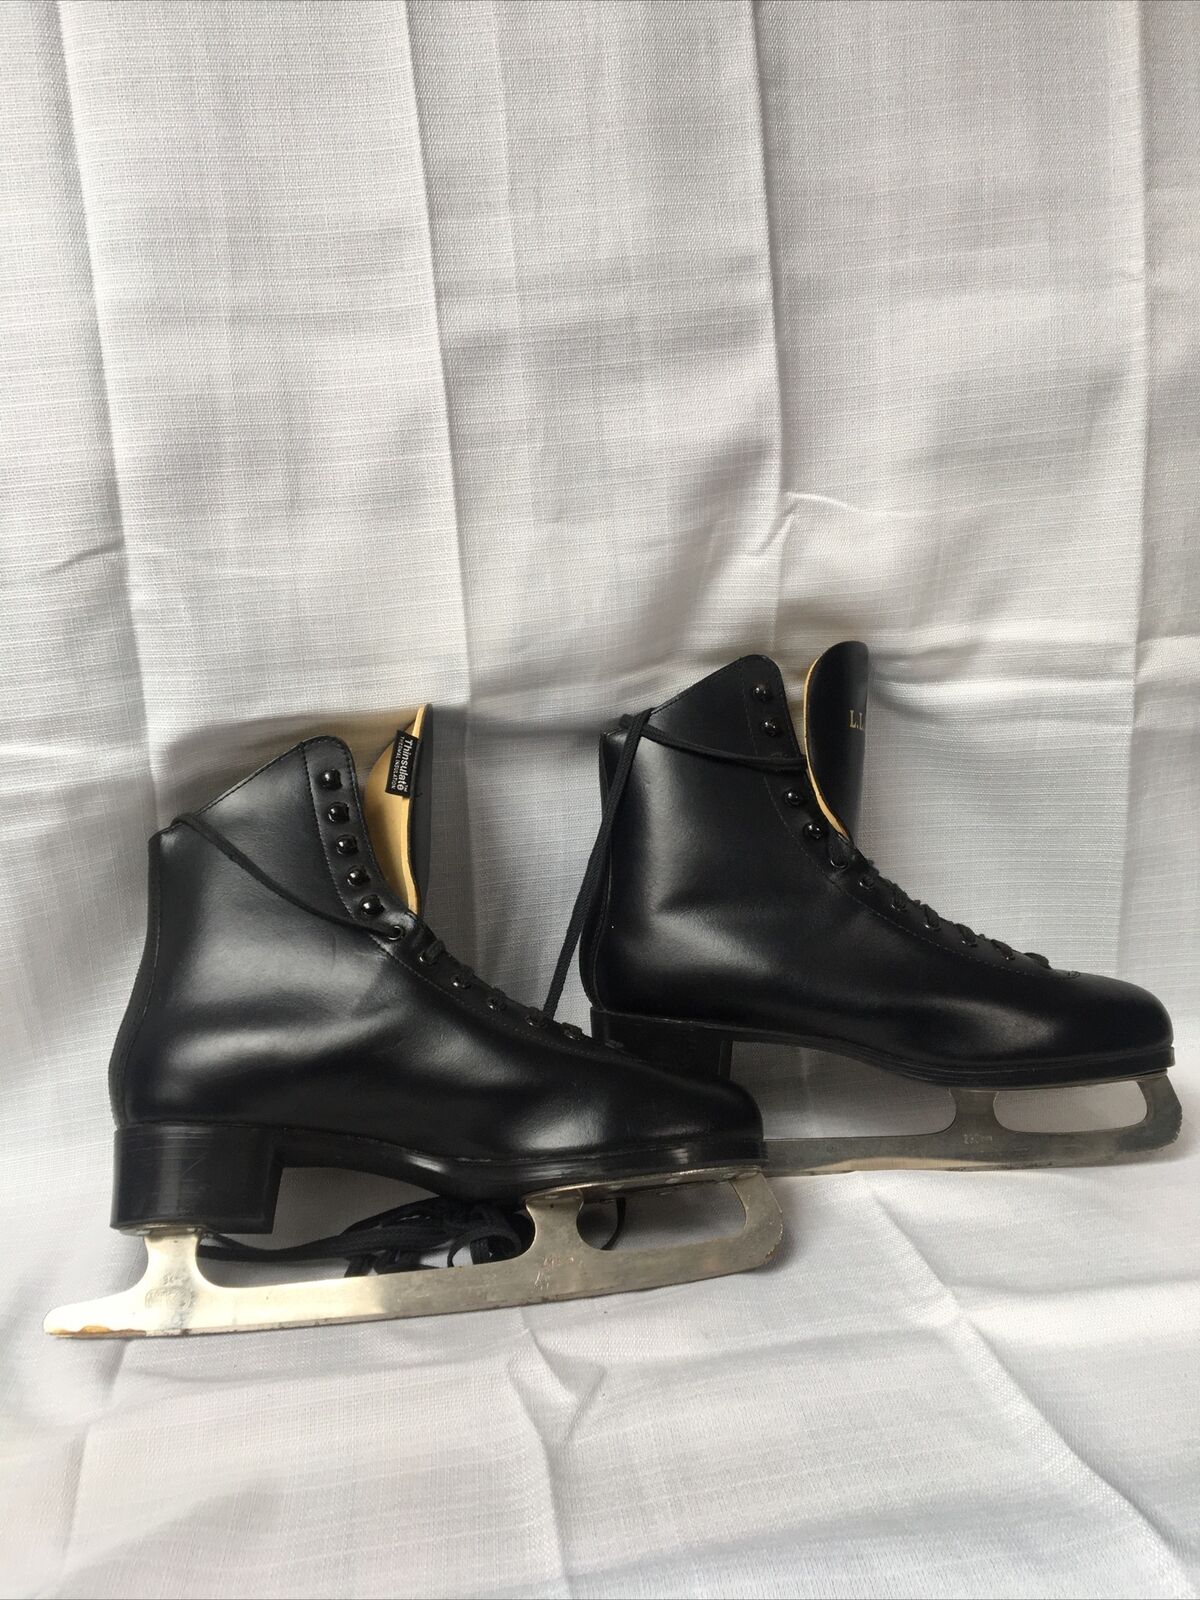 Ll Bean Black Leather Figure Ice Skates With Sabina Blades Size 9.5 - 290mm